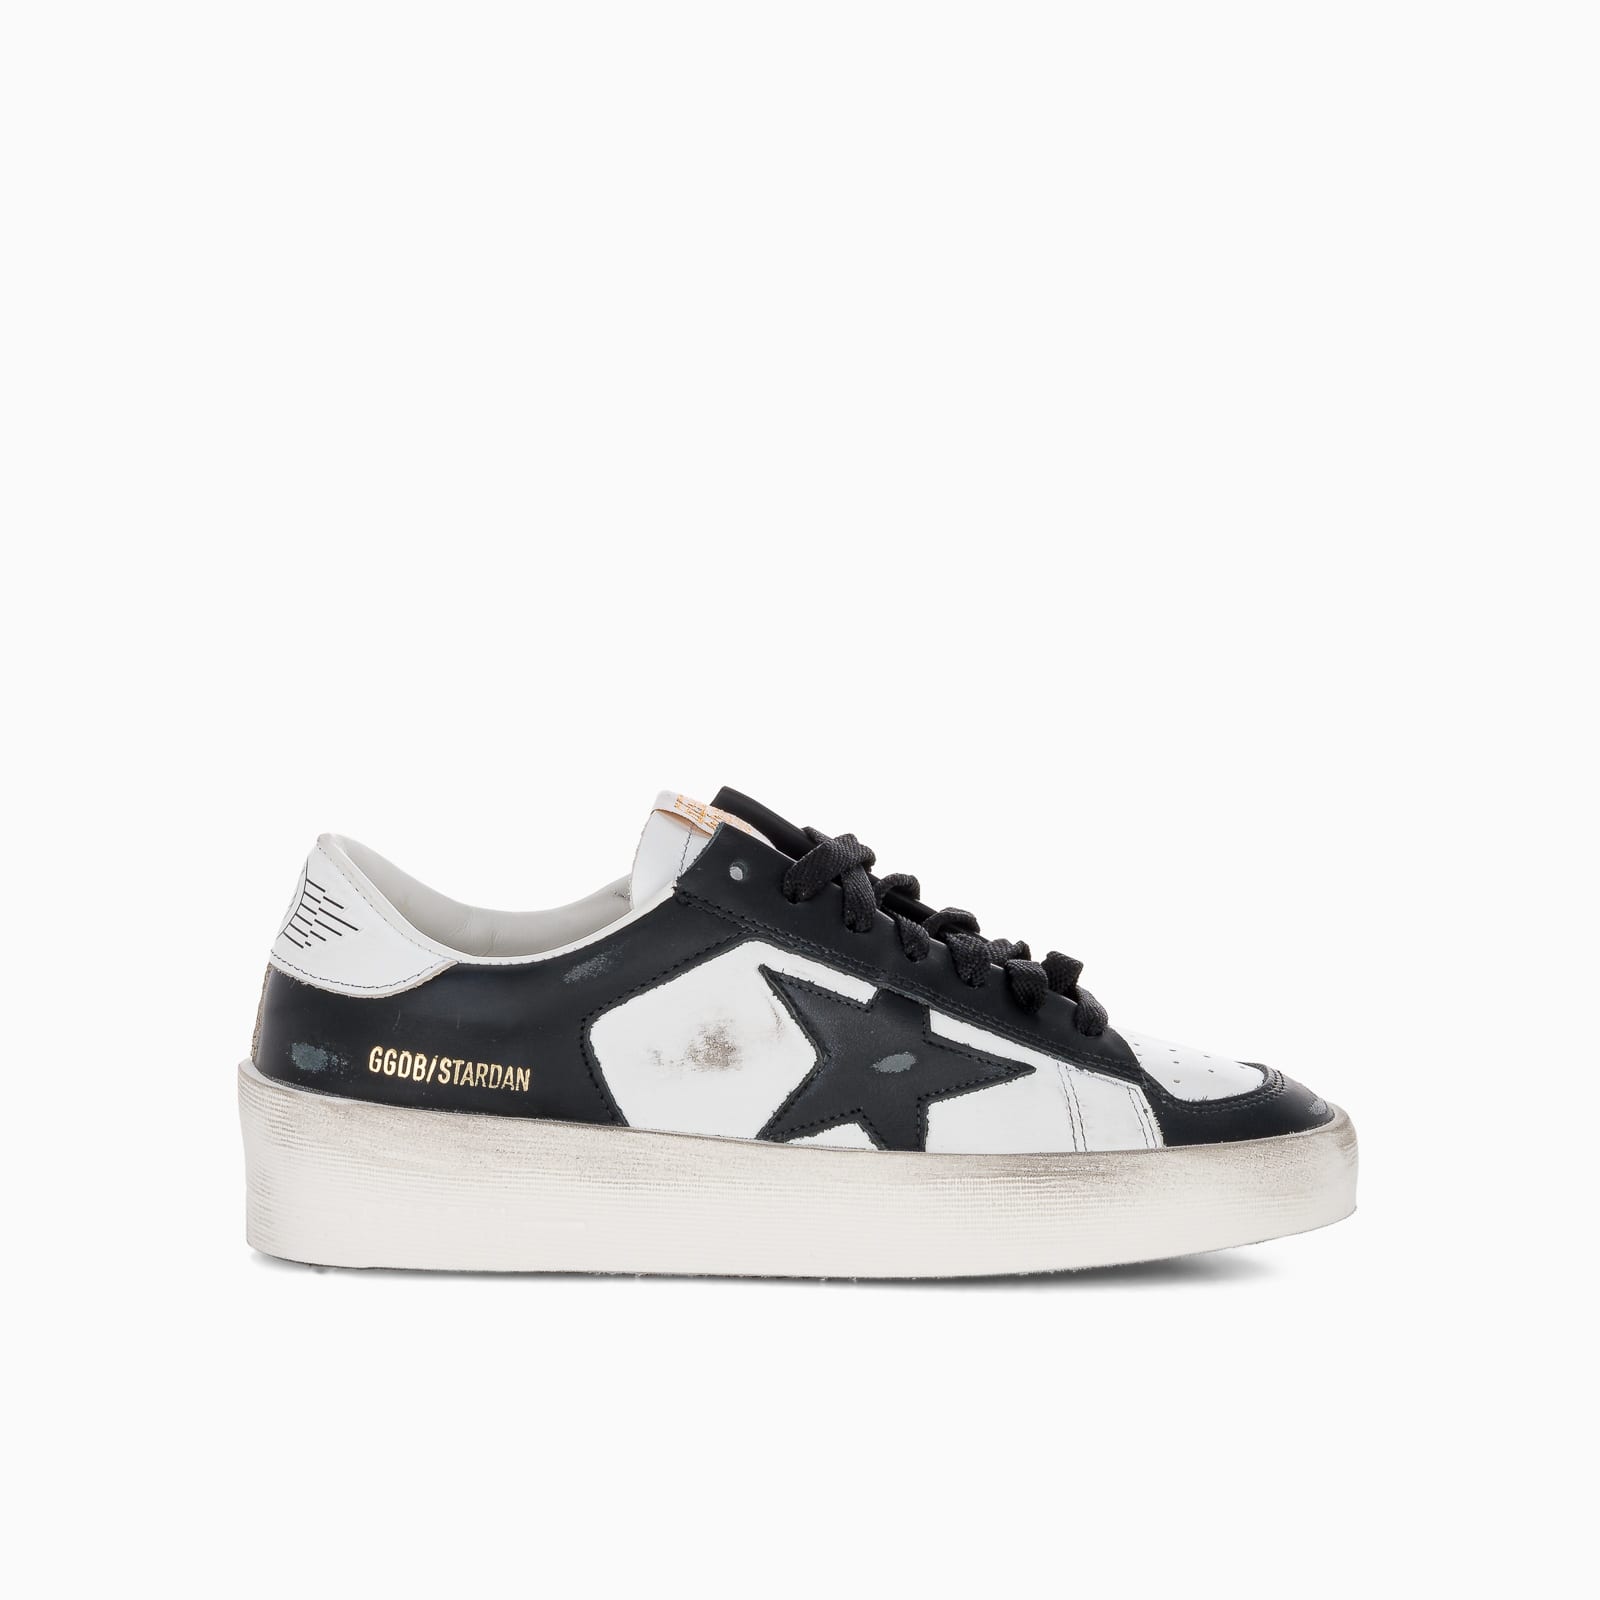 Buy Golden Goose Womens Stardan Sneakers In Black And White Leather online, shop Golden Goose shoes with free shipping